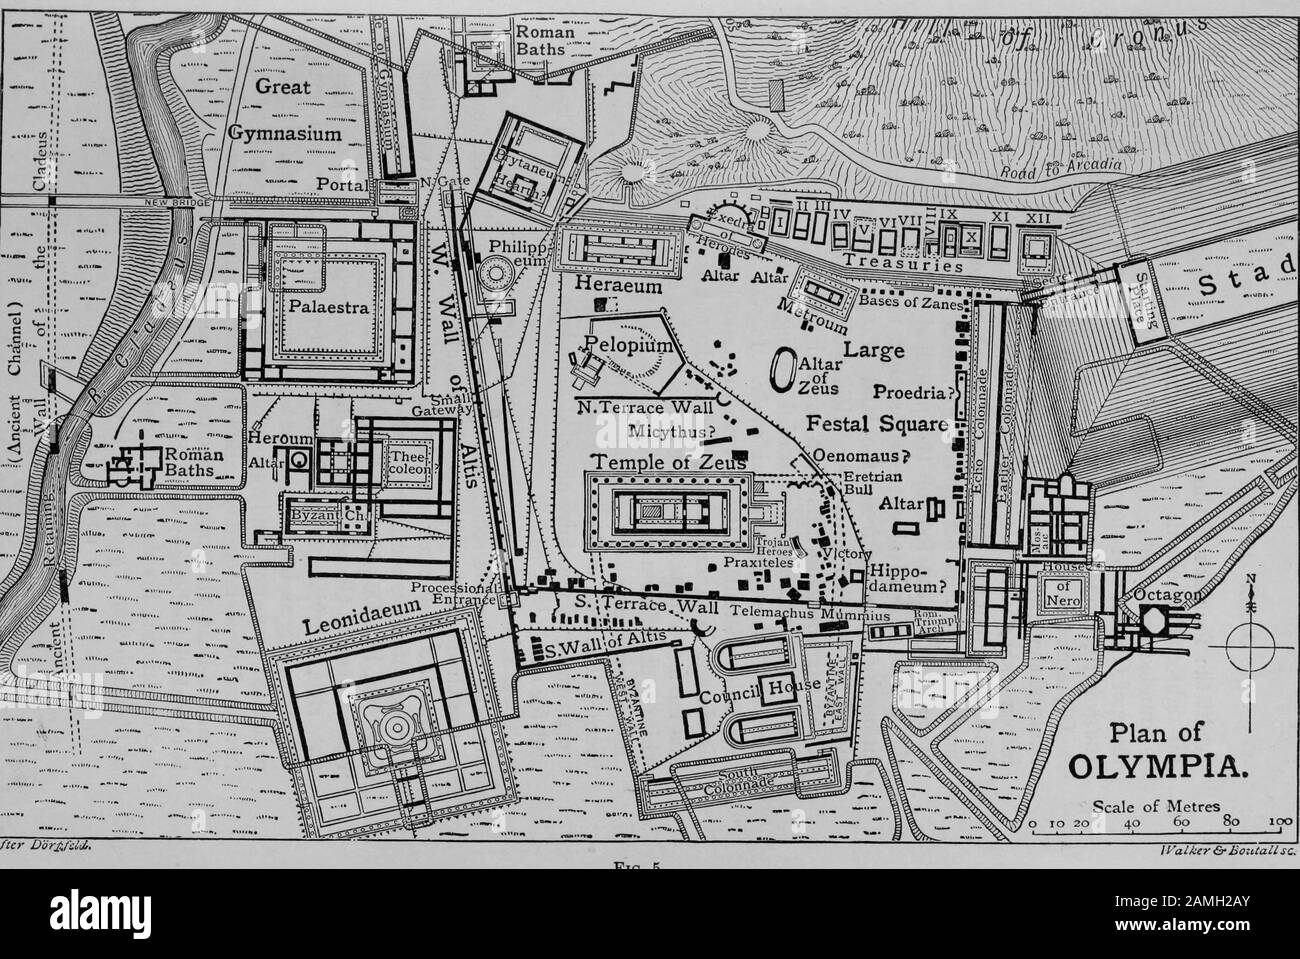 Map and plan of the Greek city of Olympia, home of the ancient Olympic Games, Greece, showing gymnasium and Temple of Zeus, 1910. Courtesy Internet Archive. () Stock Photo